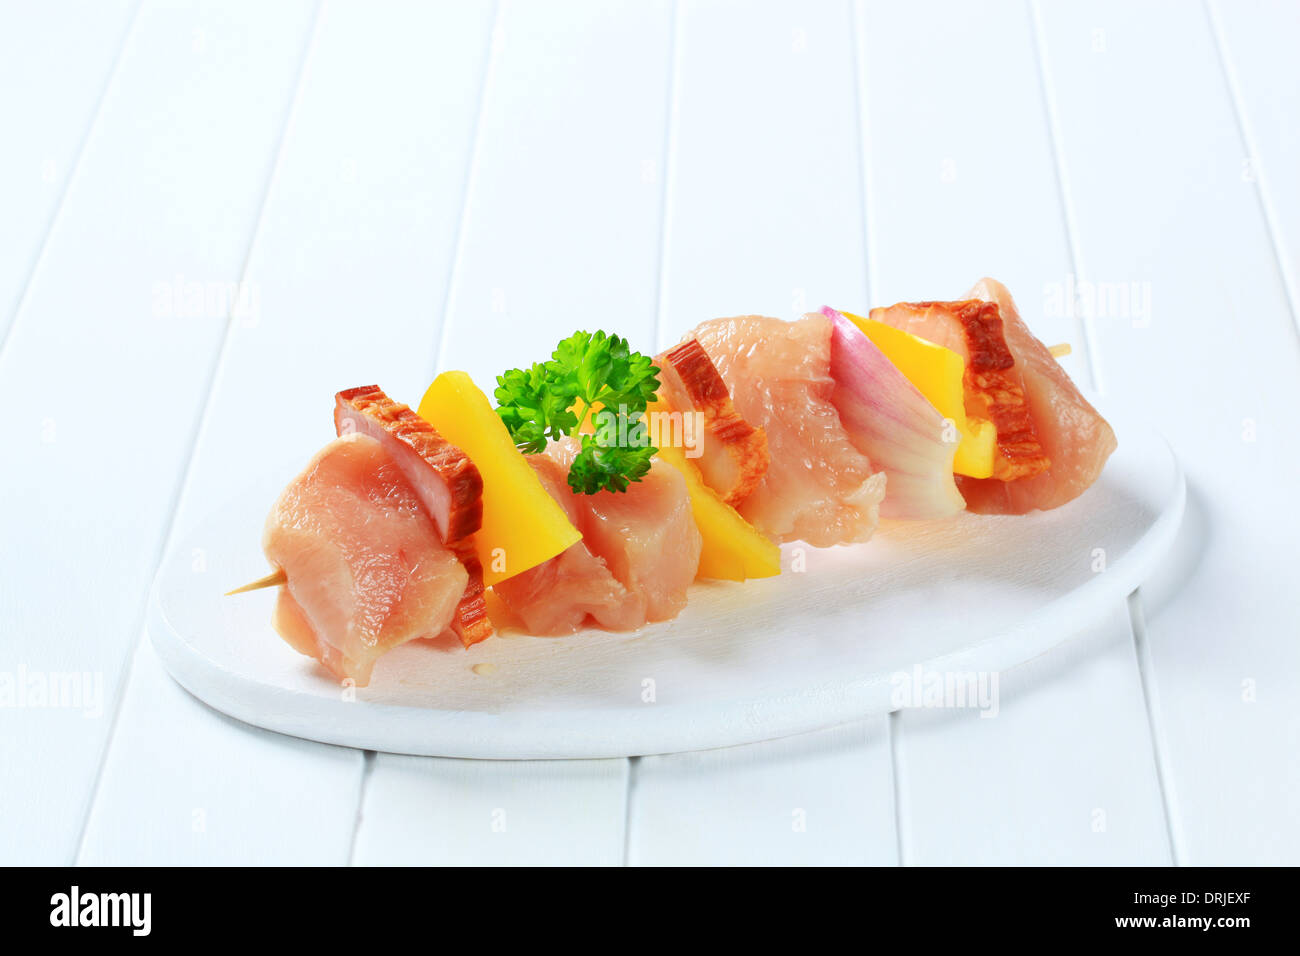 Raw chicken shish kebab with yellow pepper and bacon Stock Photo